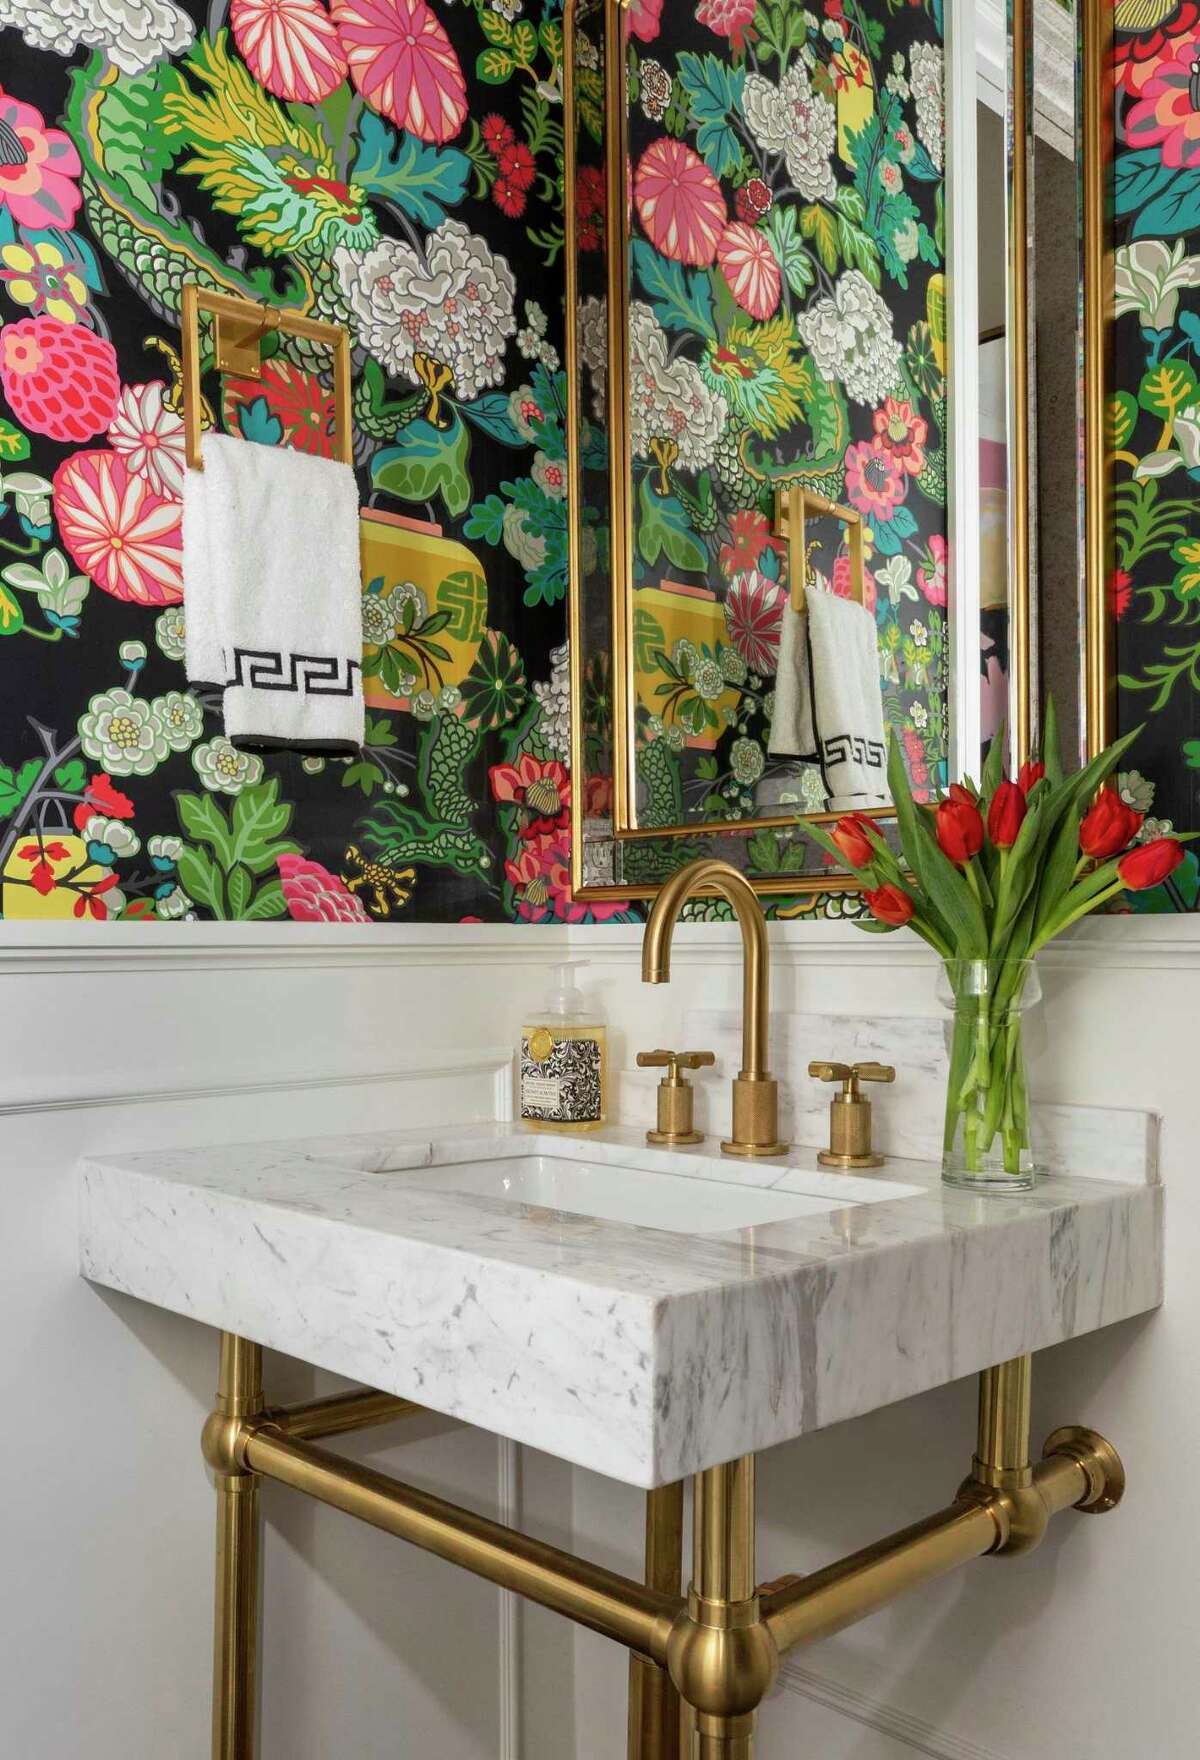 A plain powder bathroom got a lively makeover with paneling and wallpaper with a chinoiserie pattern.